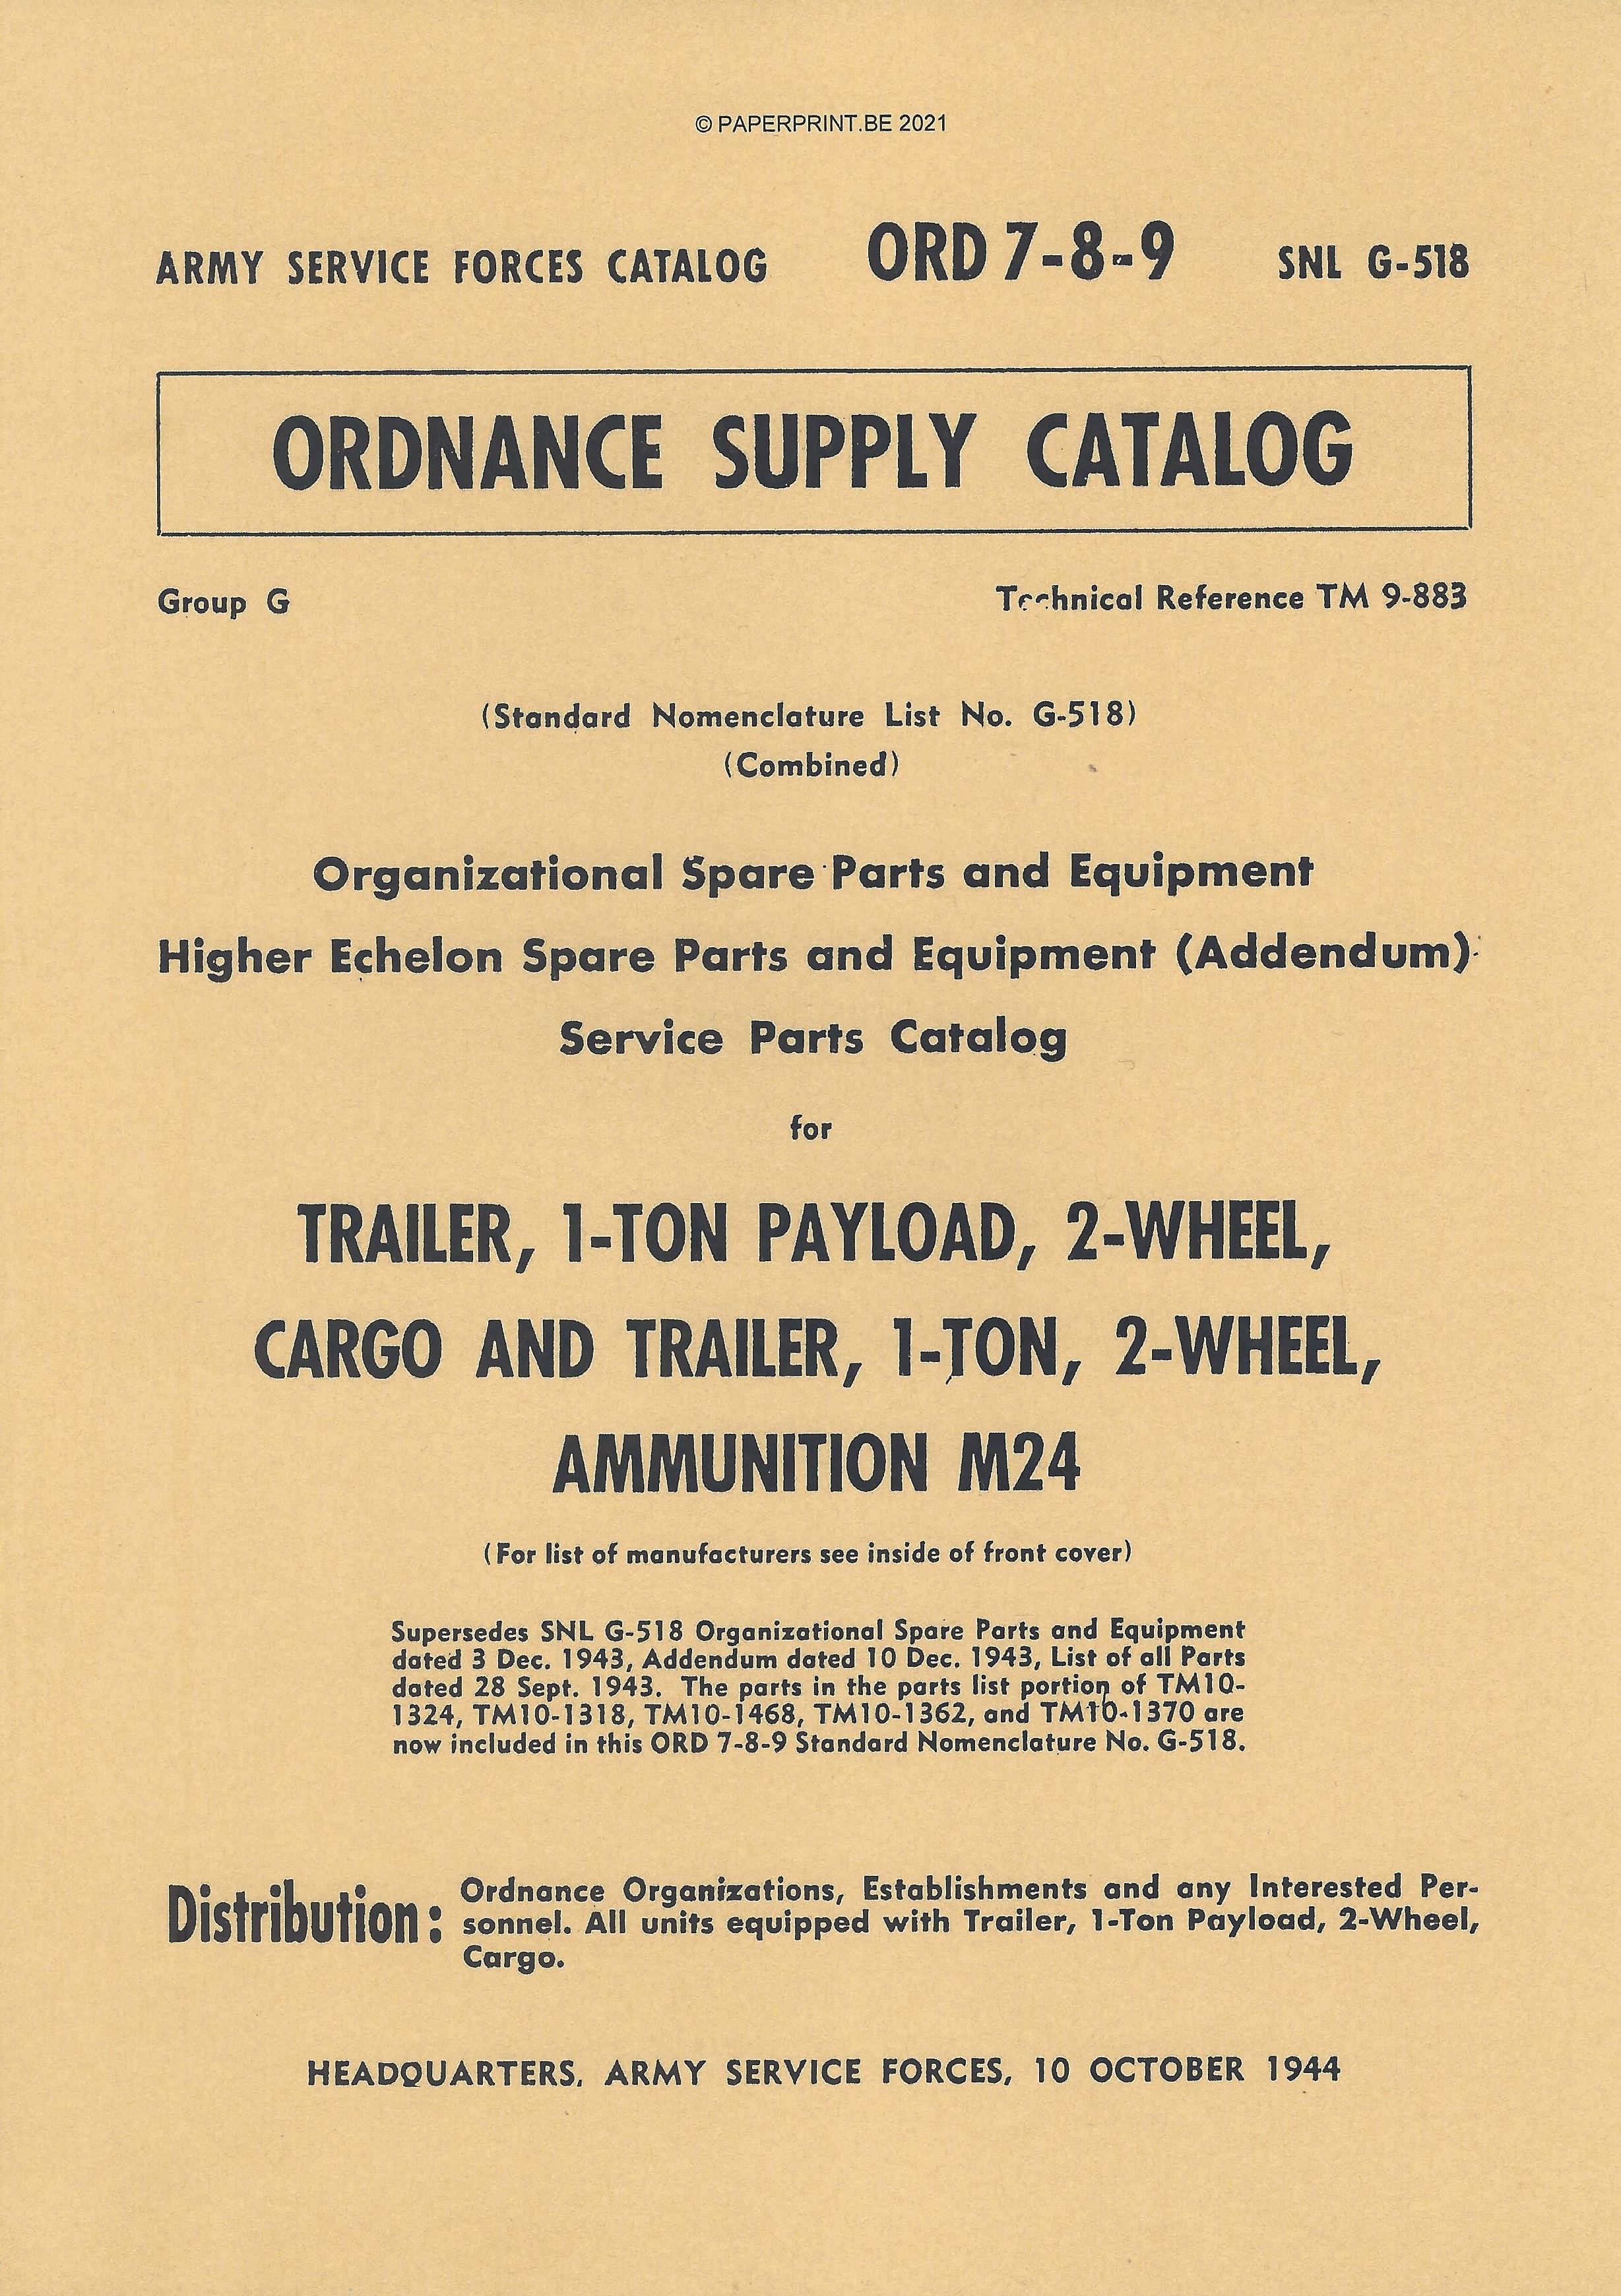 SNL G-518 US SERVICE PARTS CATALOG FOR TRAILER, 1-TON PAYLOAD, 2-WHEEL, CARGO AND TRAILER, 1-TON, 2-WHEEL, AMMUNITION M24